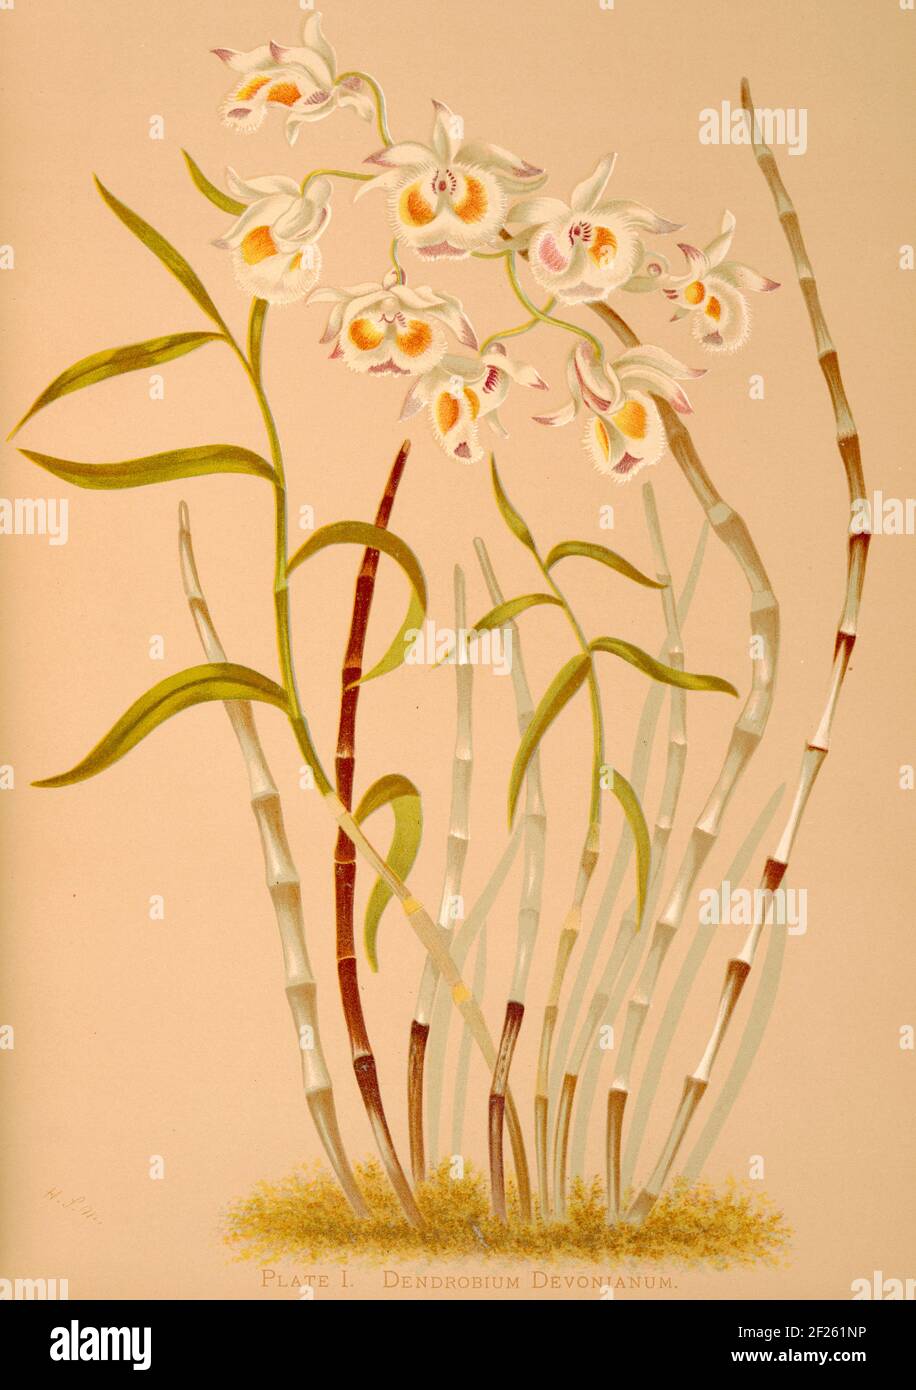 Harriet Stewart Miner's botanical illustration from Orchids - The Royal Family of Plants from 1885 - Dendrobium devonianum or Life Giving Tree. Stock Photo